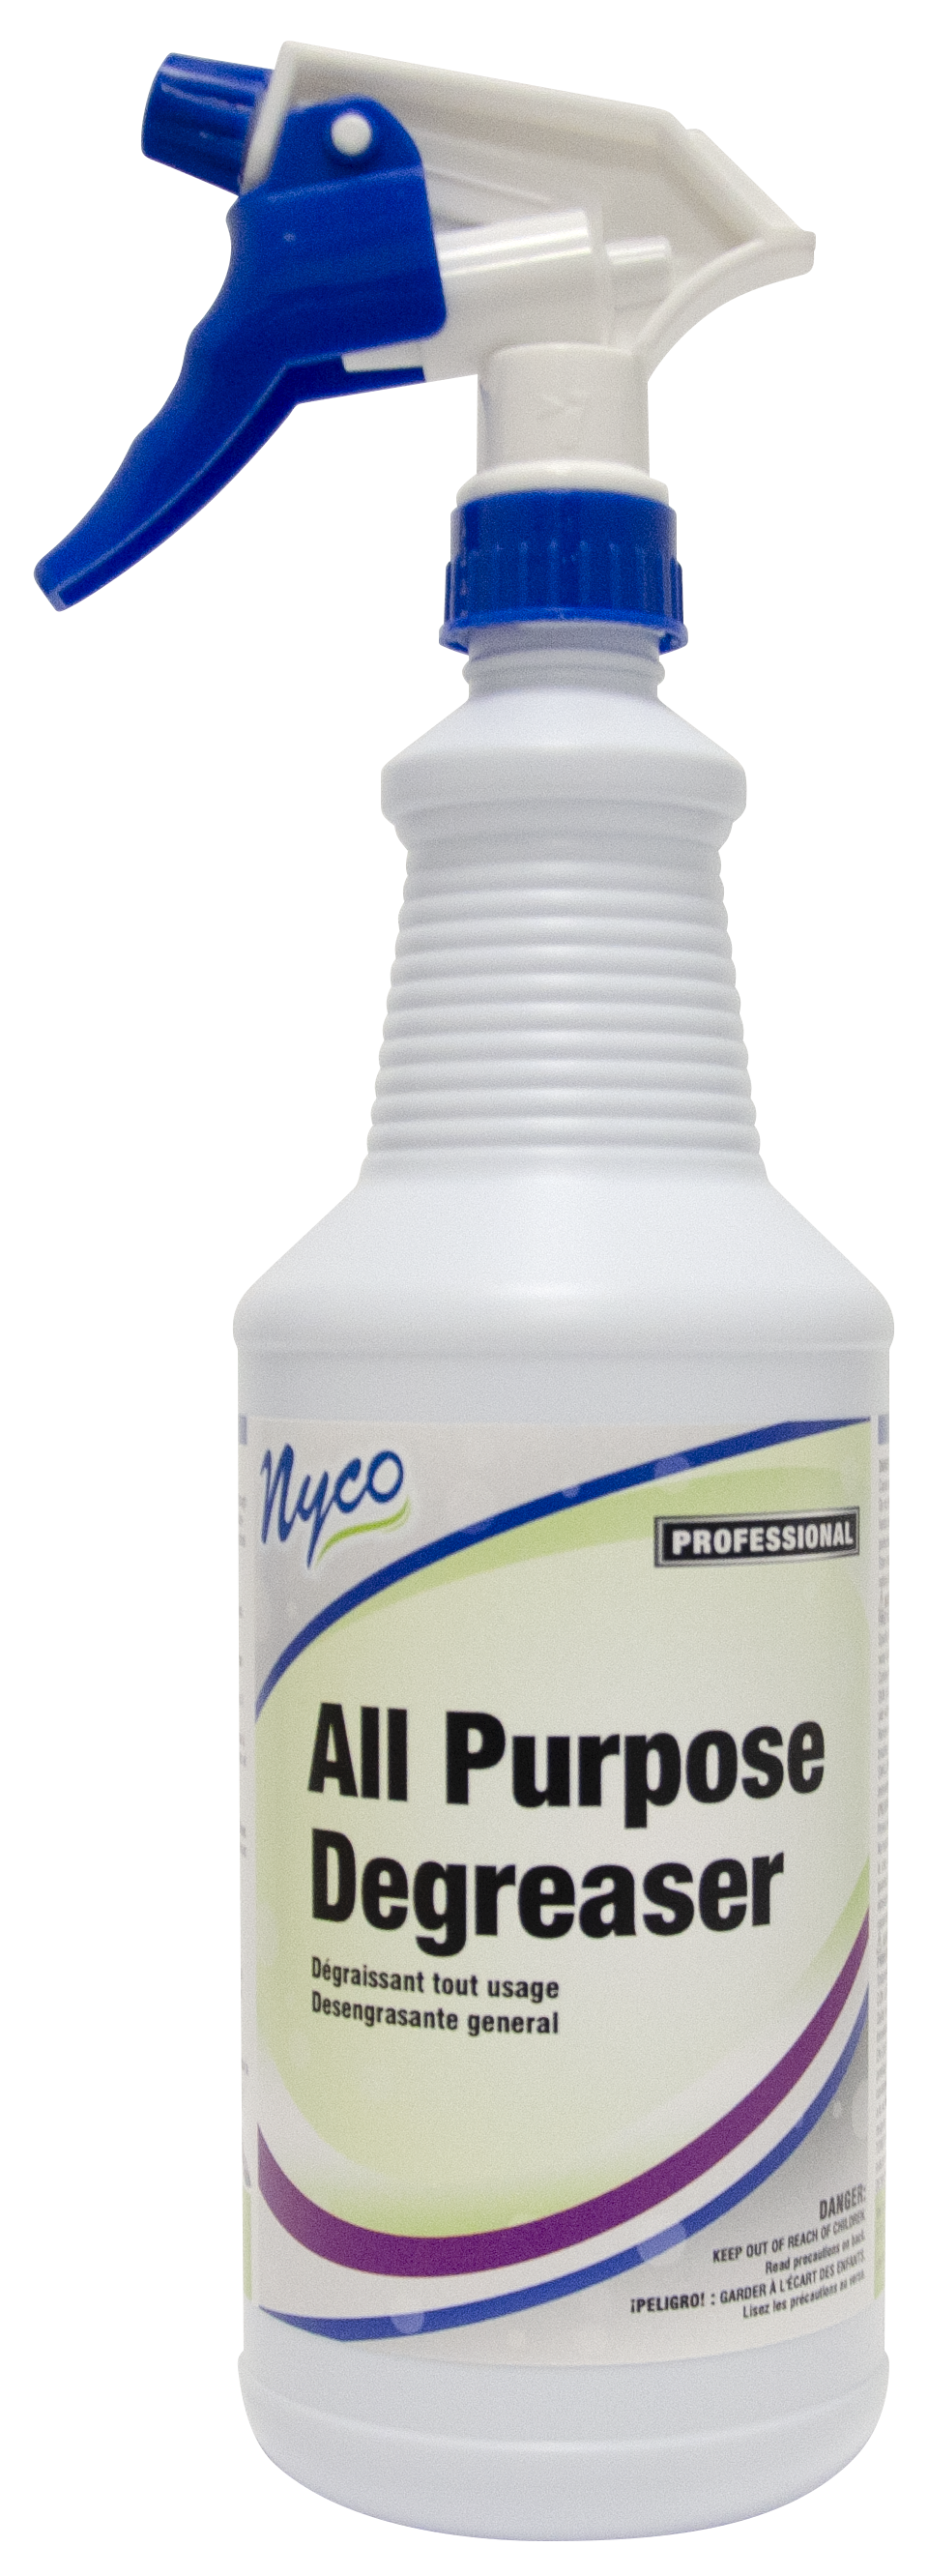 All Purpose Degreaser - Nyco Products Company